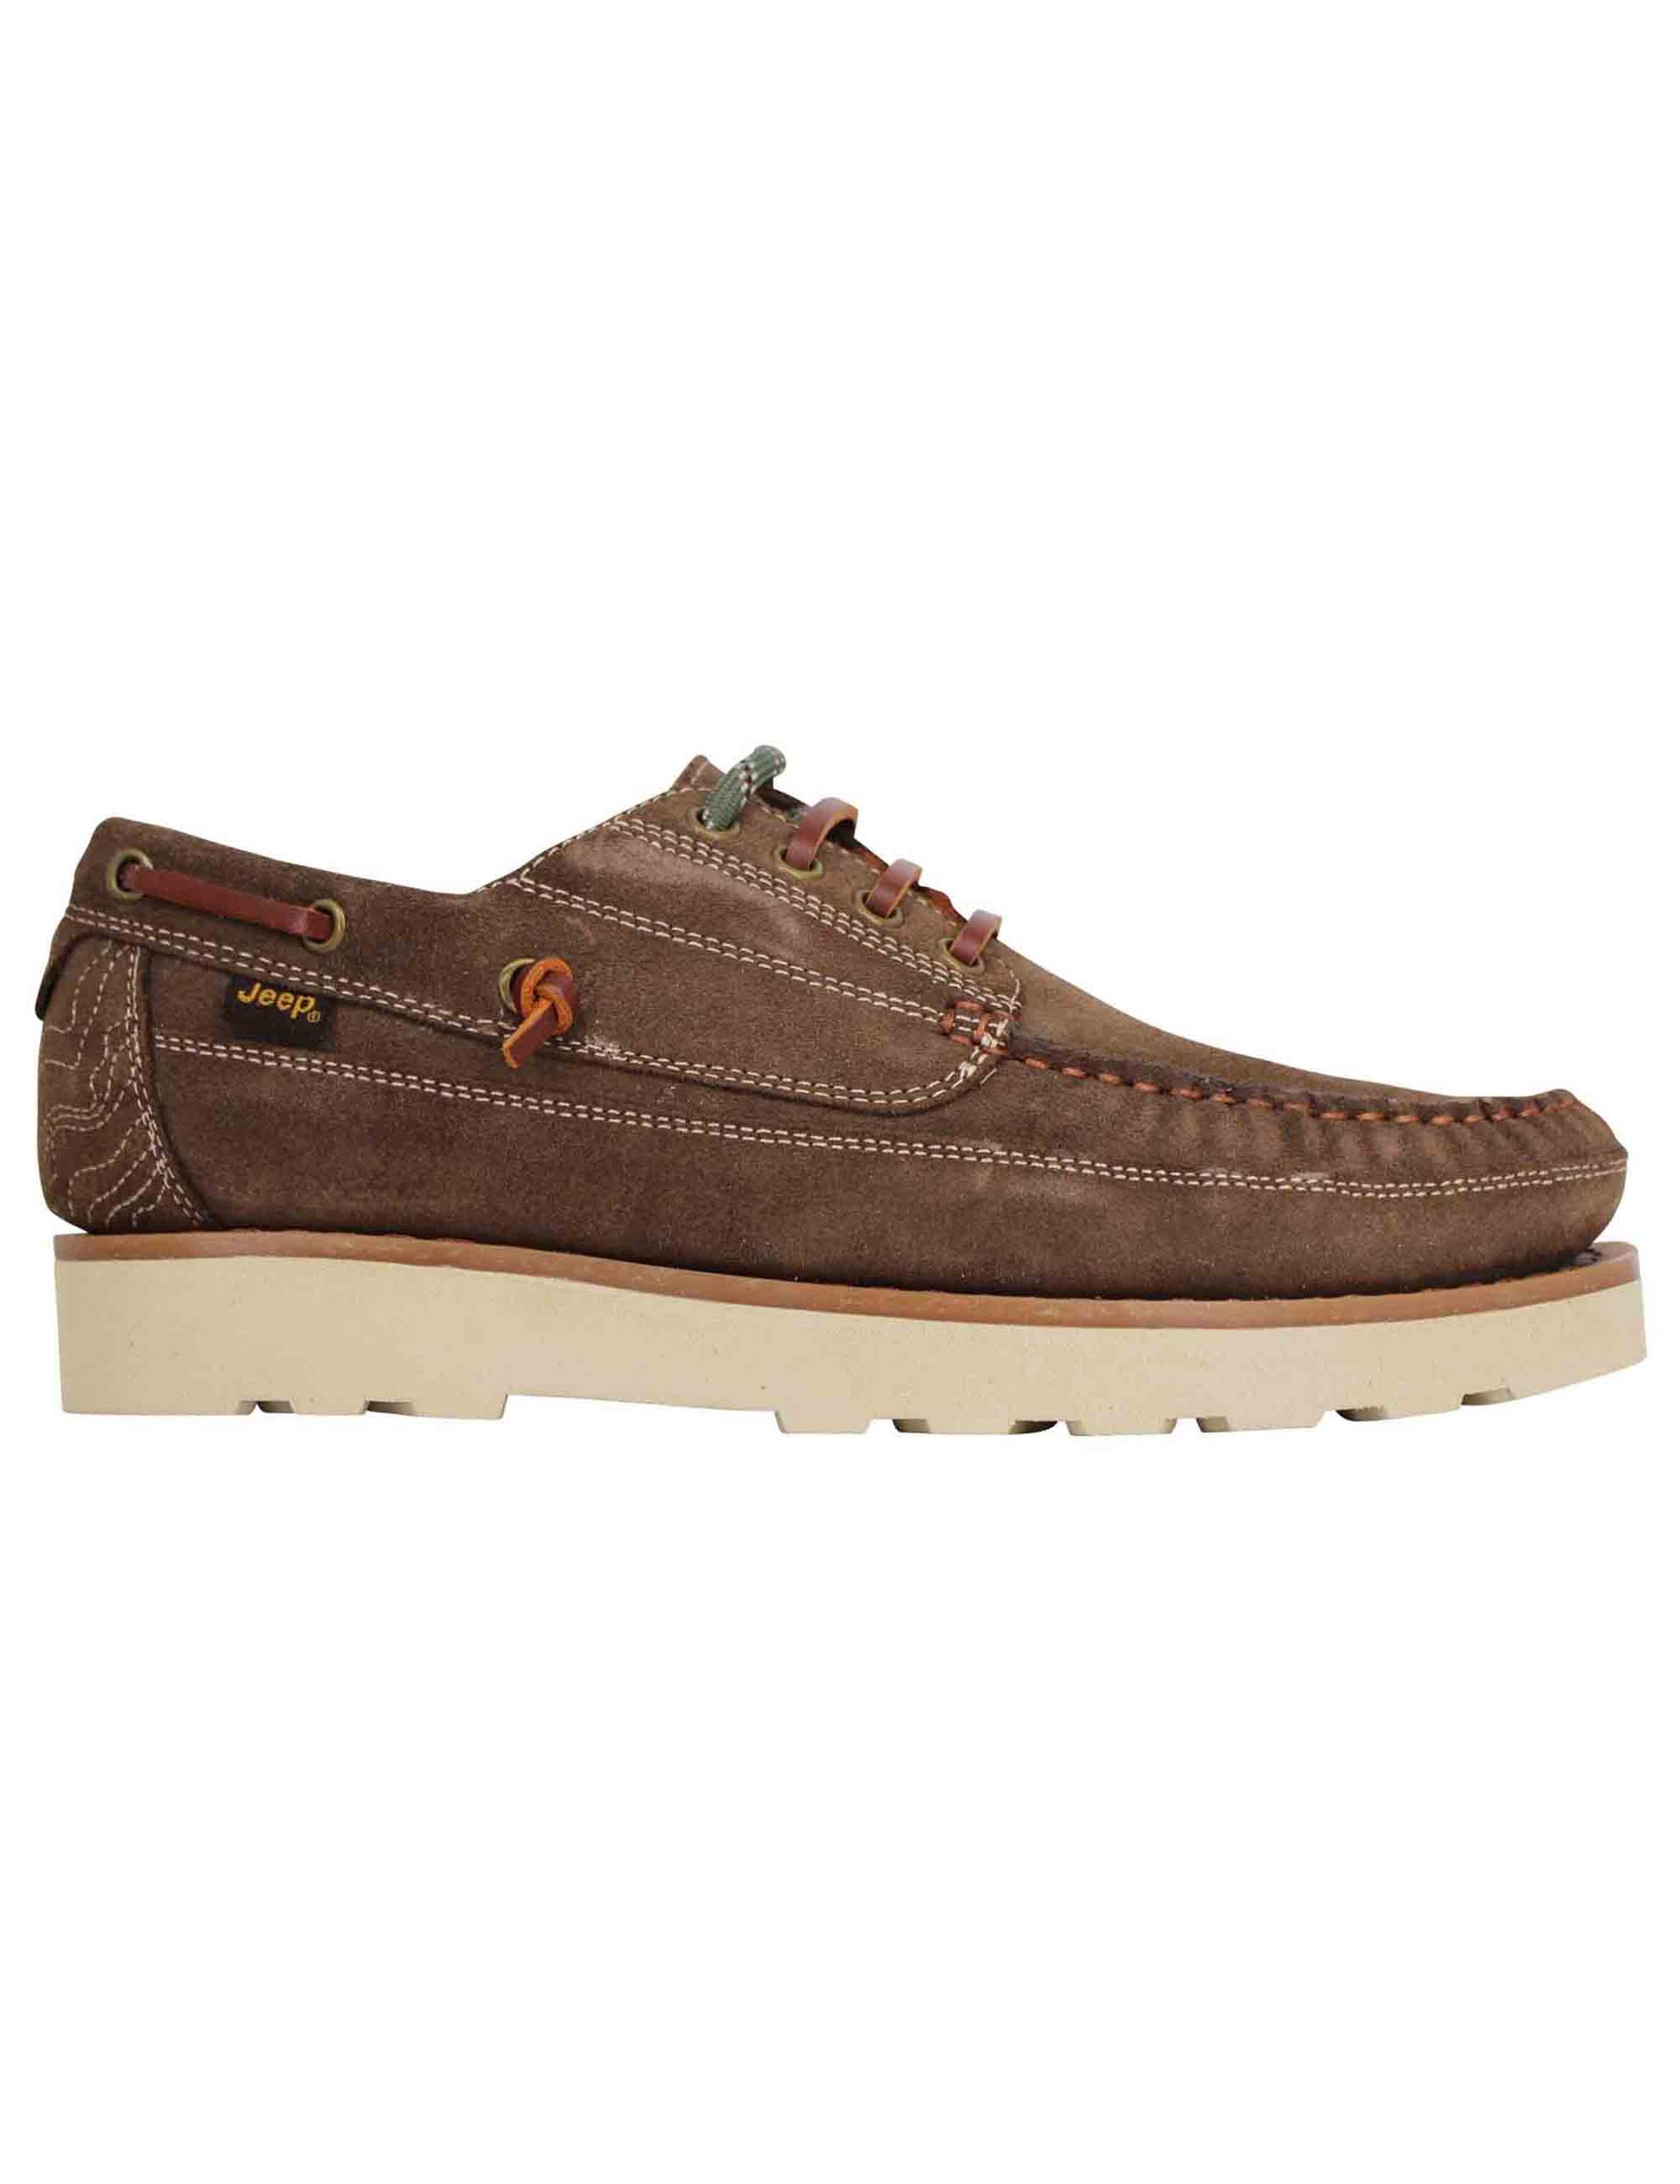 Hopi Suede men's lace-ups in brown suede with leather laces and white sole